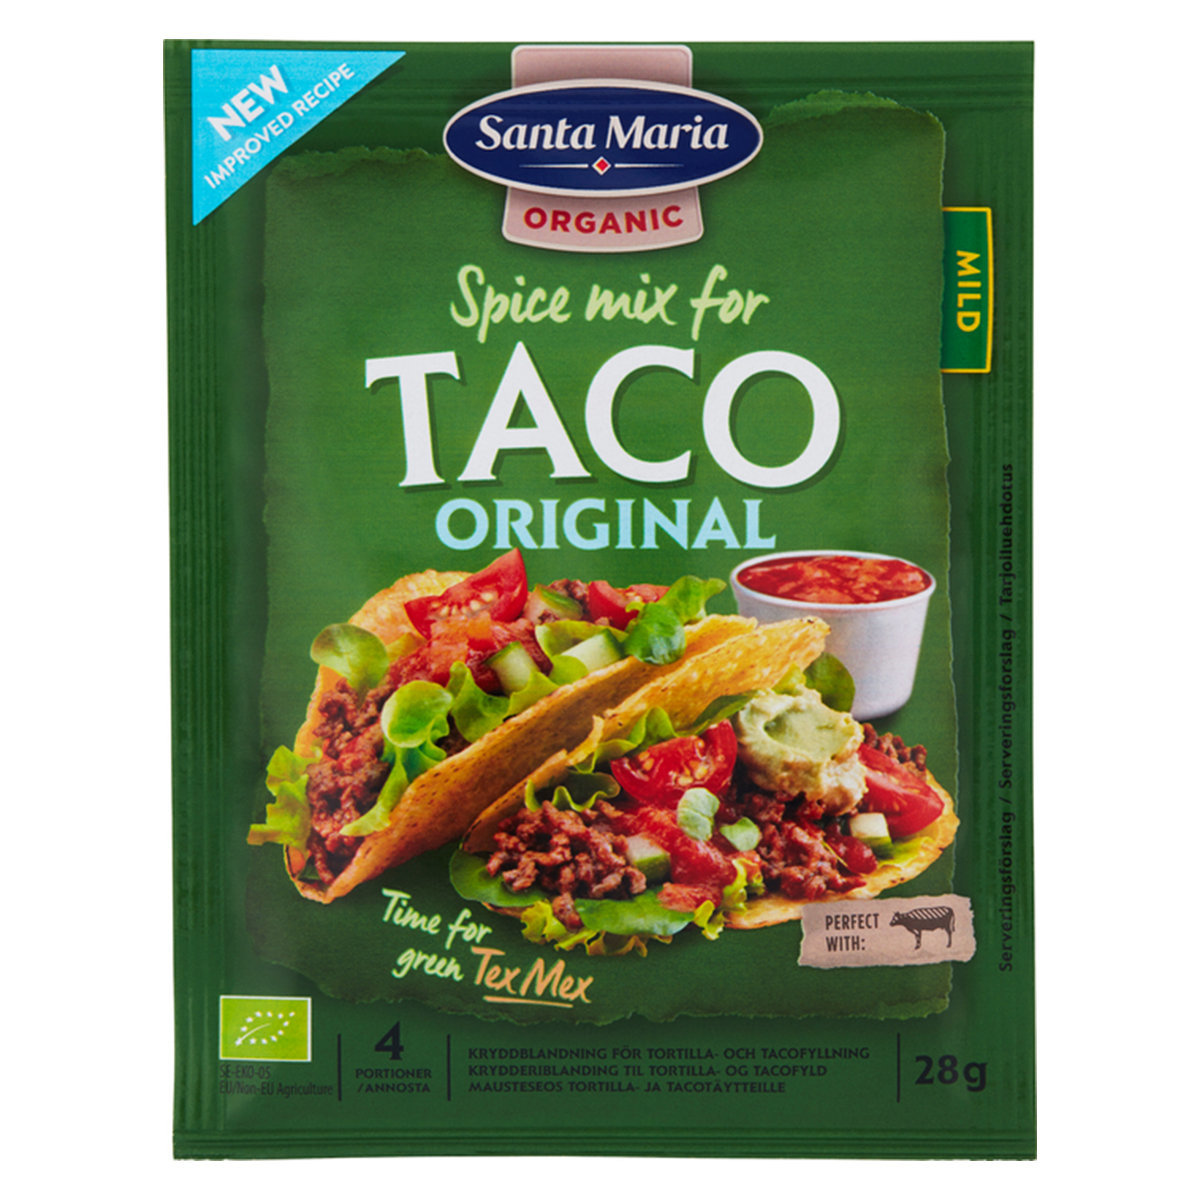 Organic Taco Spice Mix 28g (Best before: 17 May 2025)